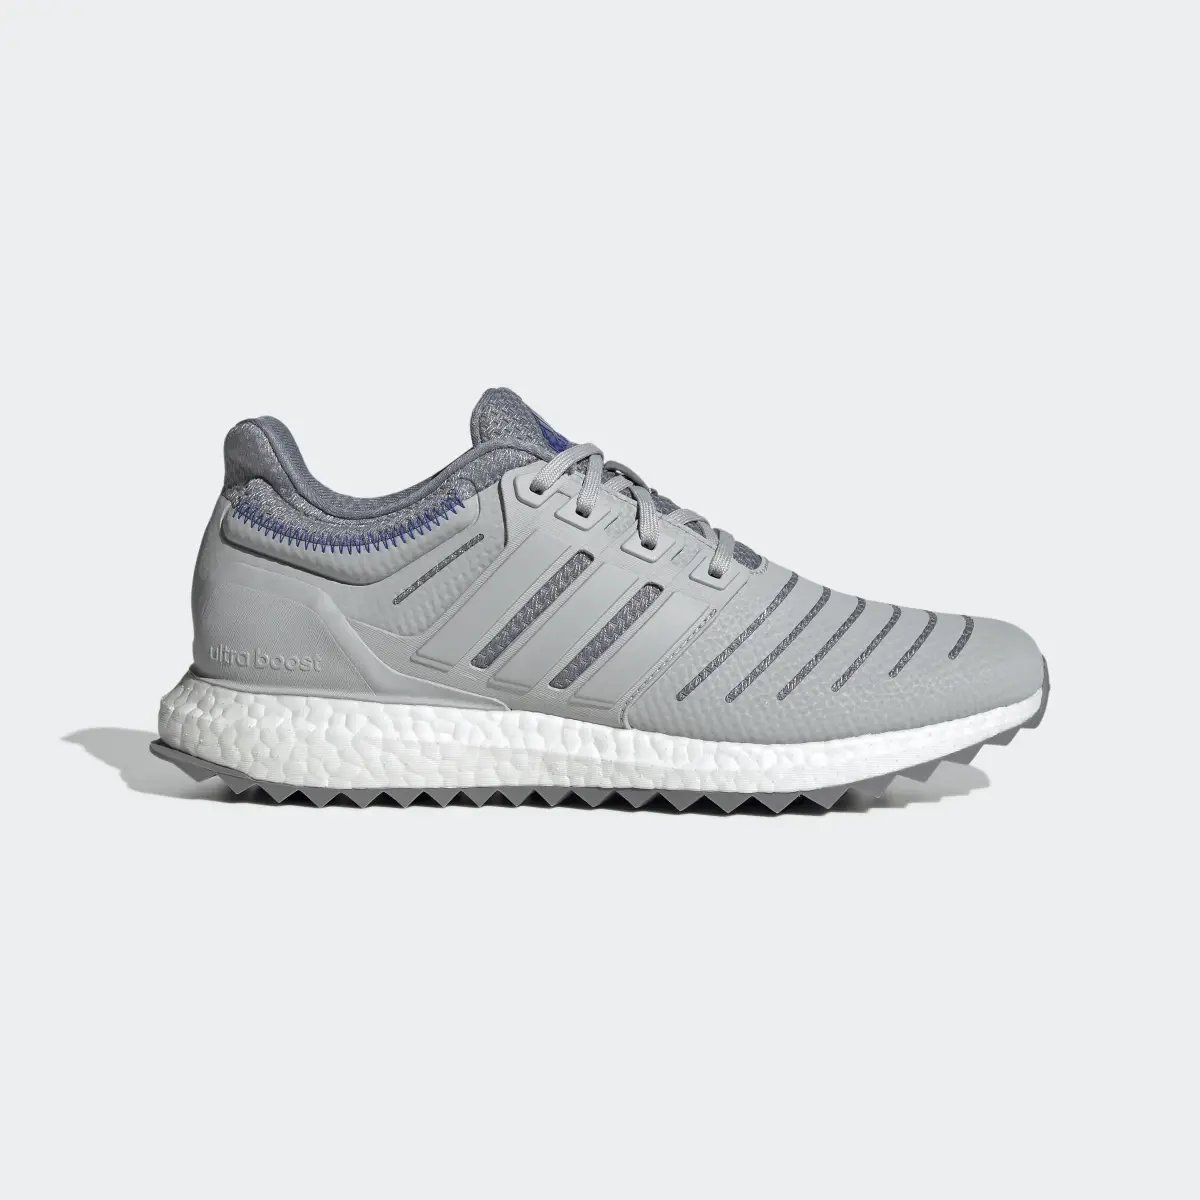 Adidas Chaussure Ultraboost DNA XXII Lifestyle Running Sportswear Capsule Collection. 2